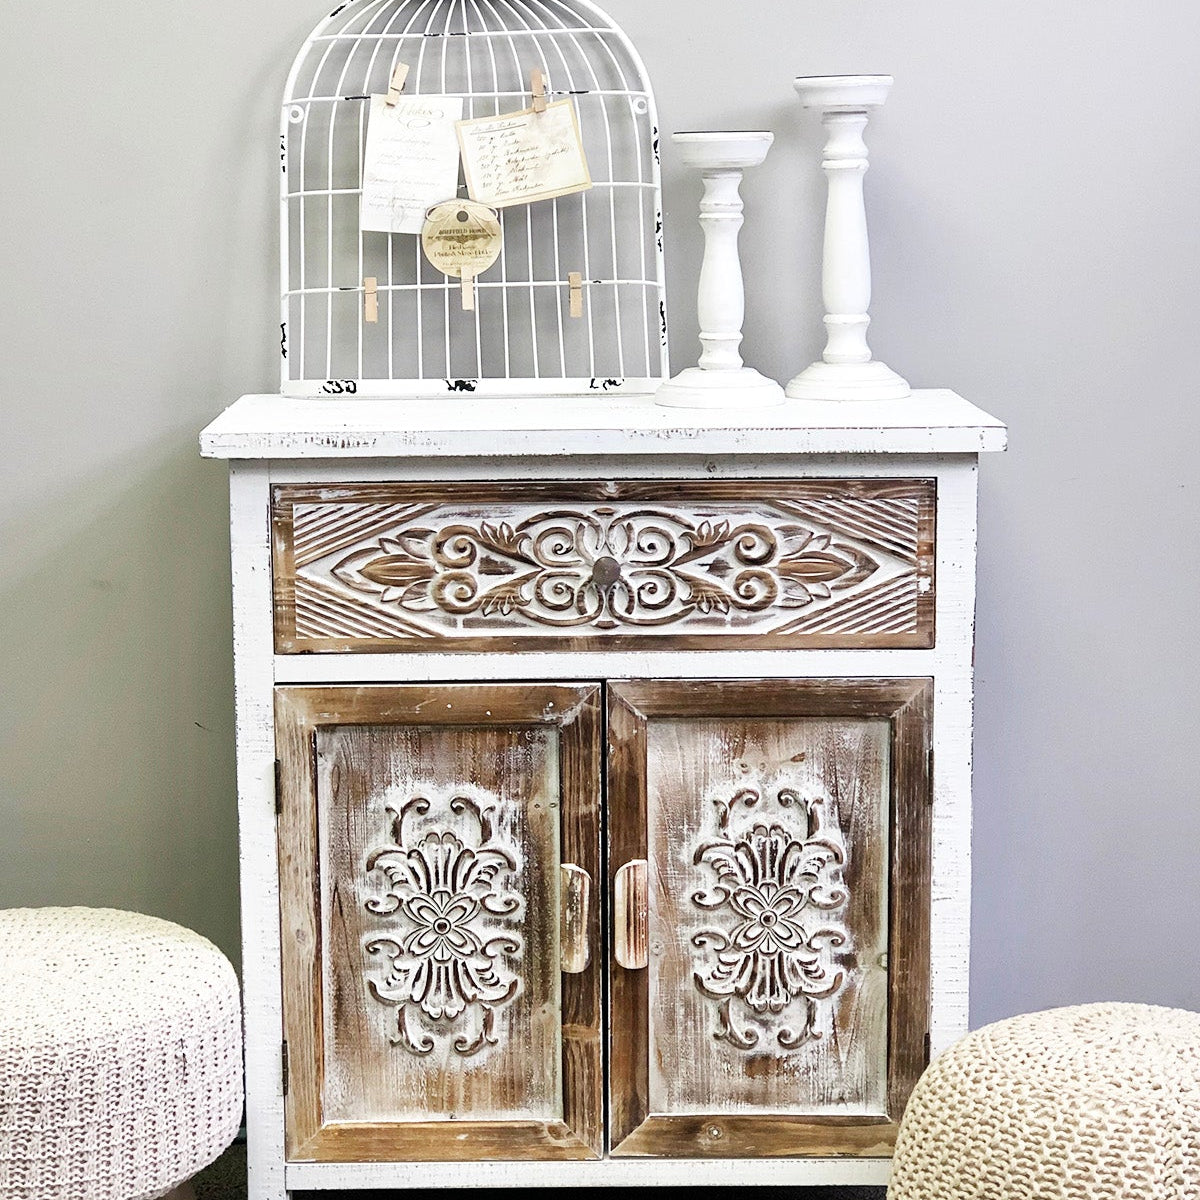 Rustic-Wood-Carved-Storage-Cabinet-with-1-Drawer-and-2-Doors-for-Entryway-or-Living-Room-Storage-Cabinets